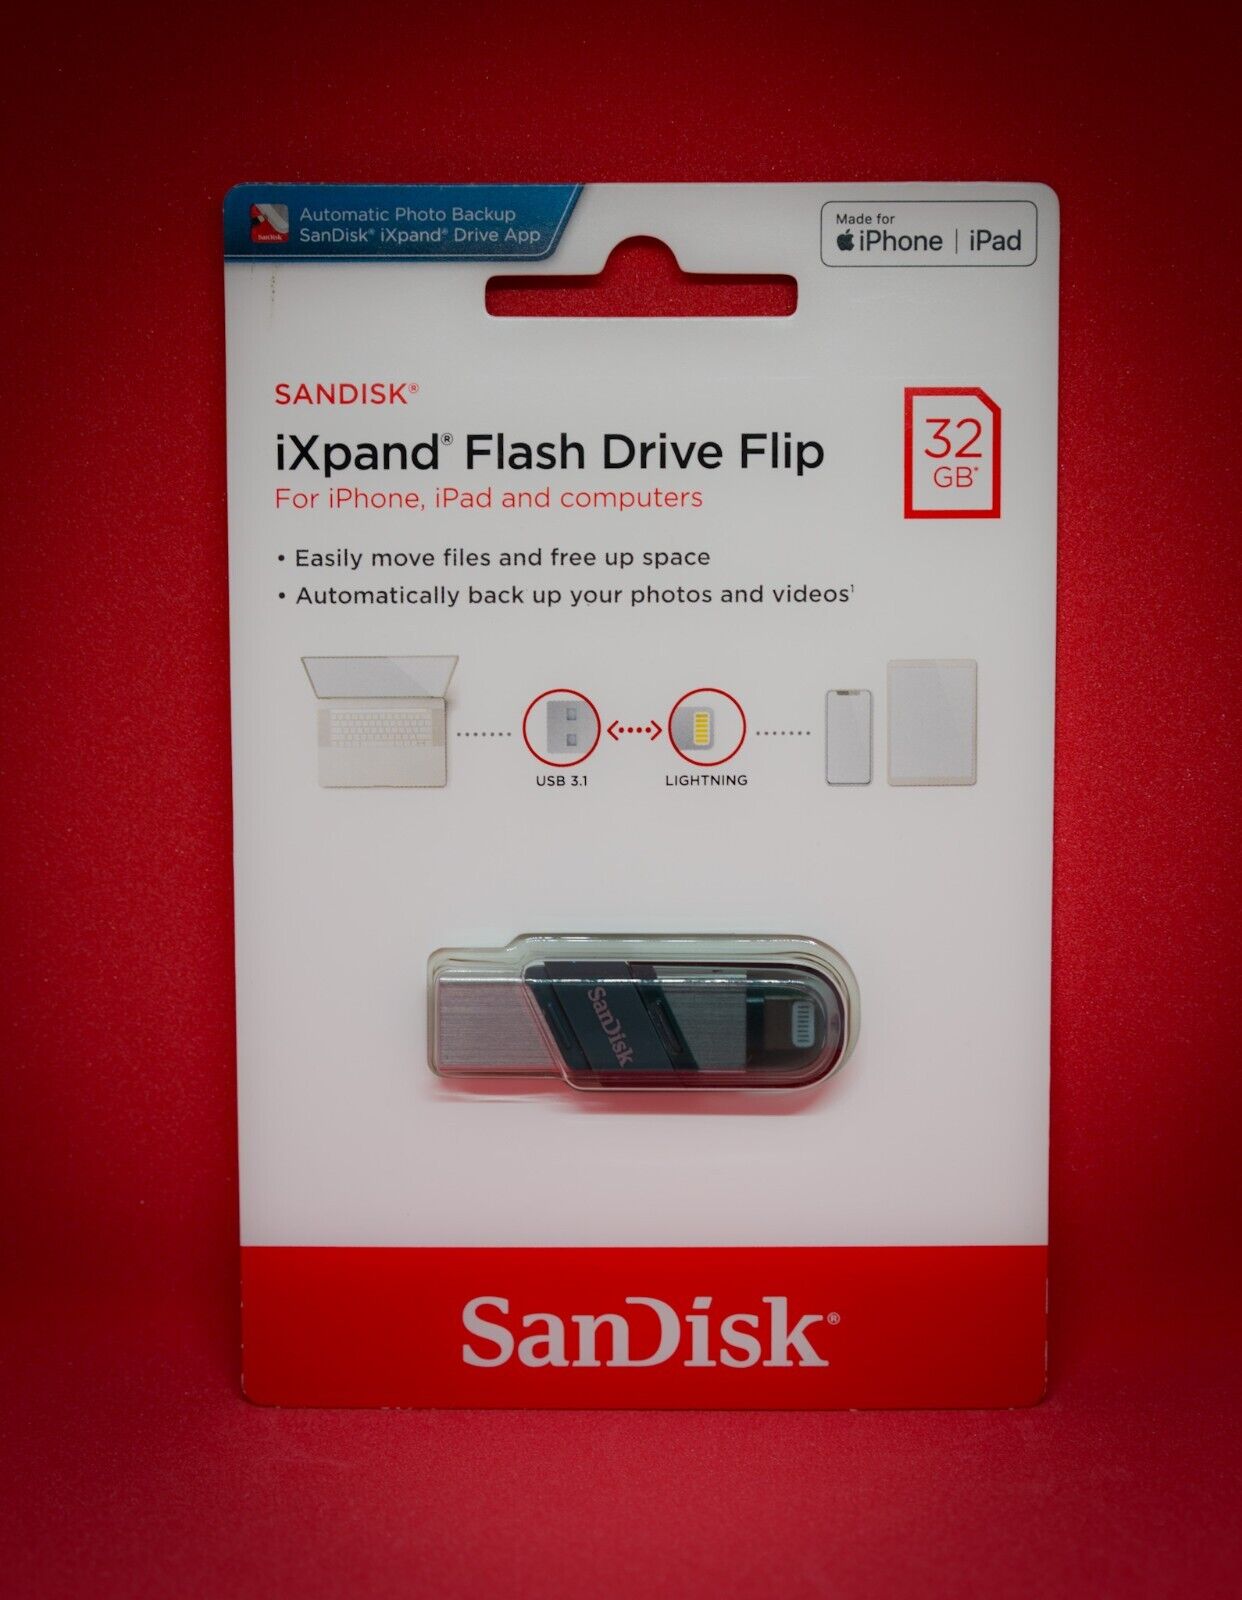 Sandisk iXpand Flash Drive Flip 32Gb for iPhone, iPad and PC USB 3.1 Silver